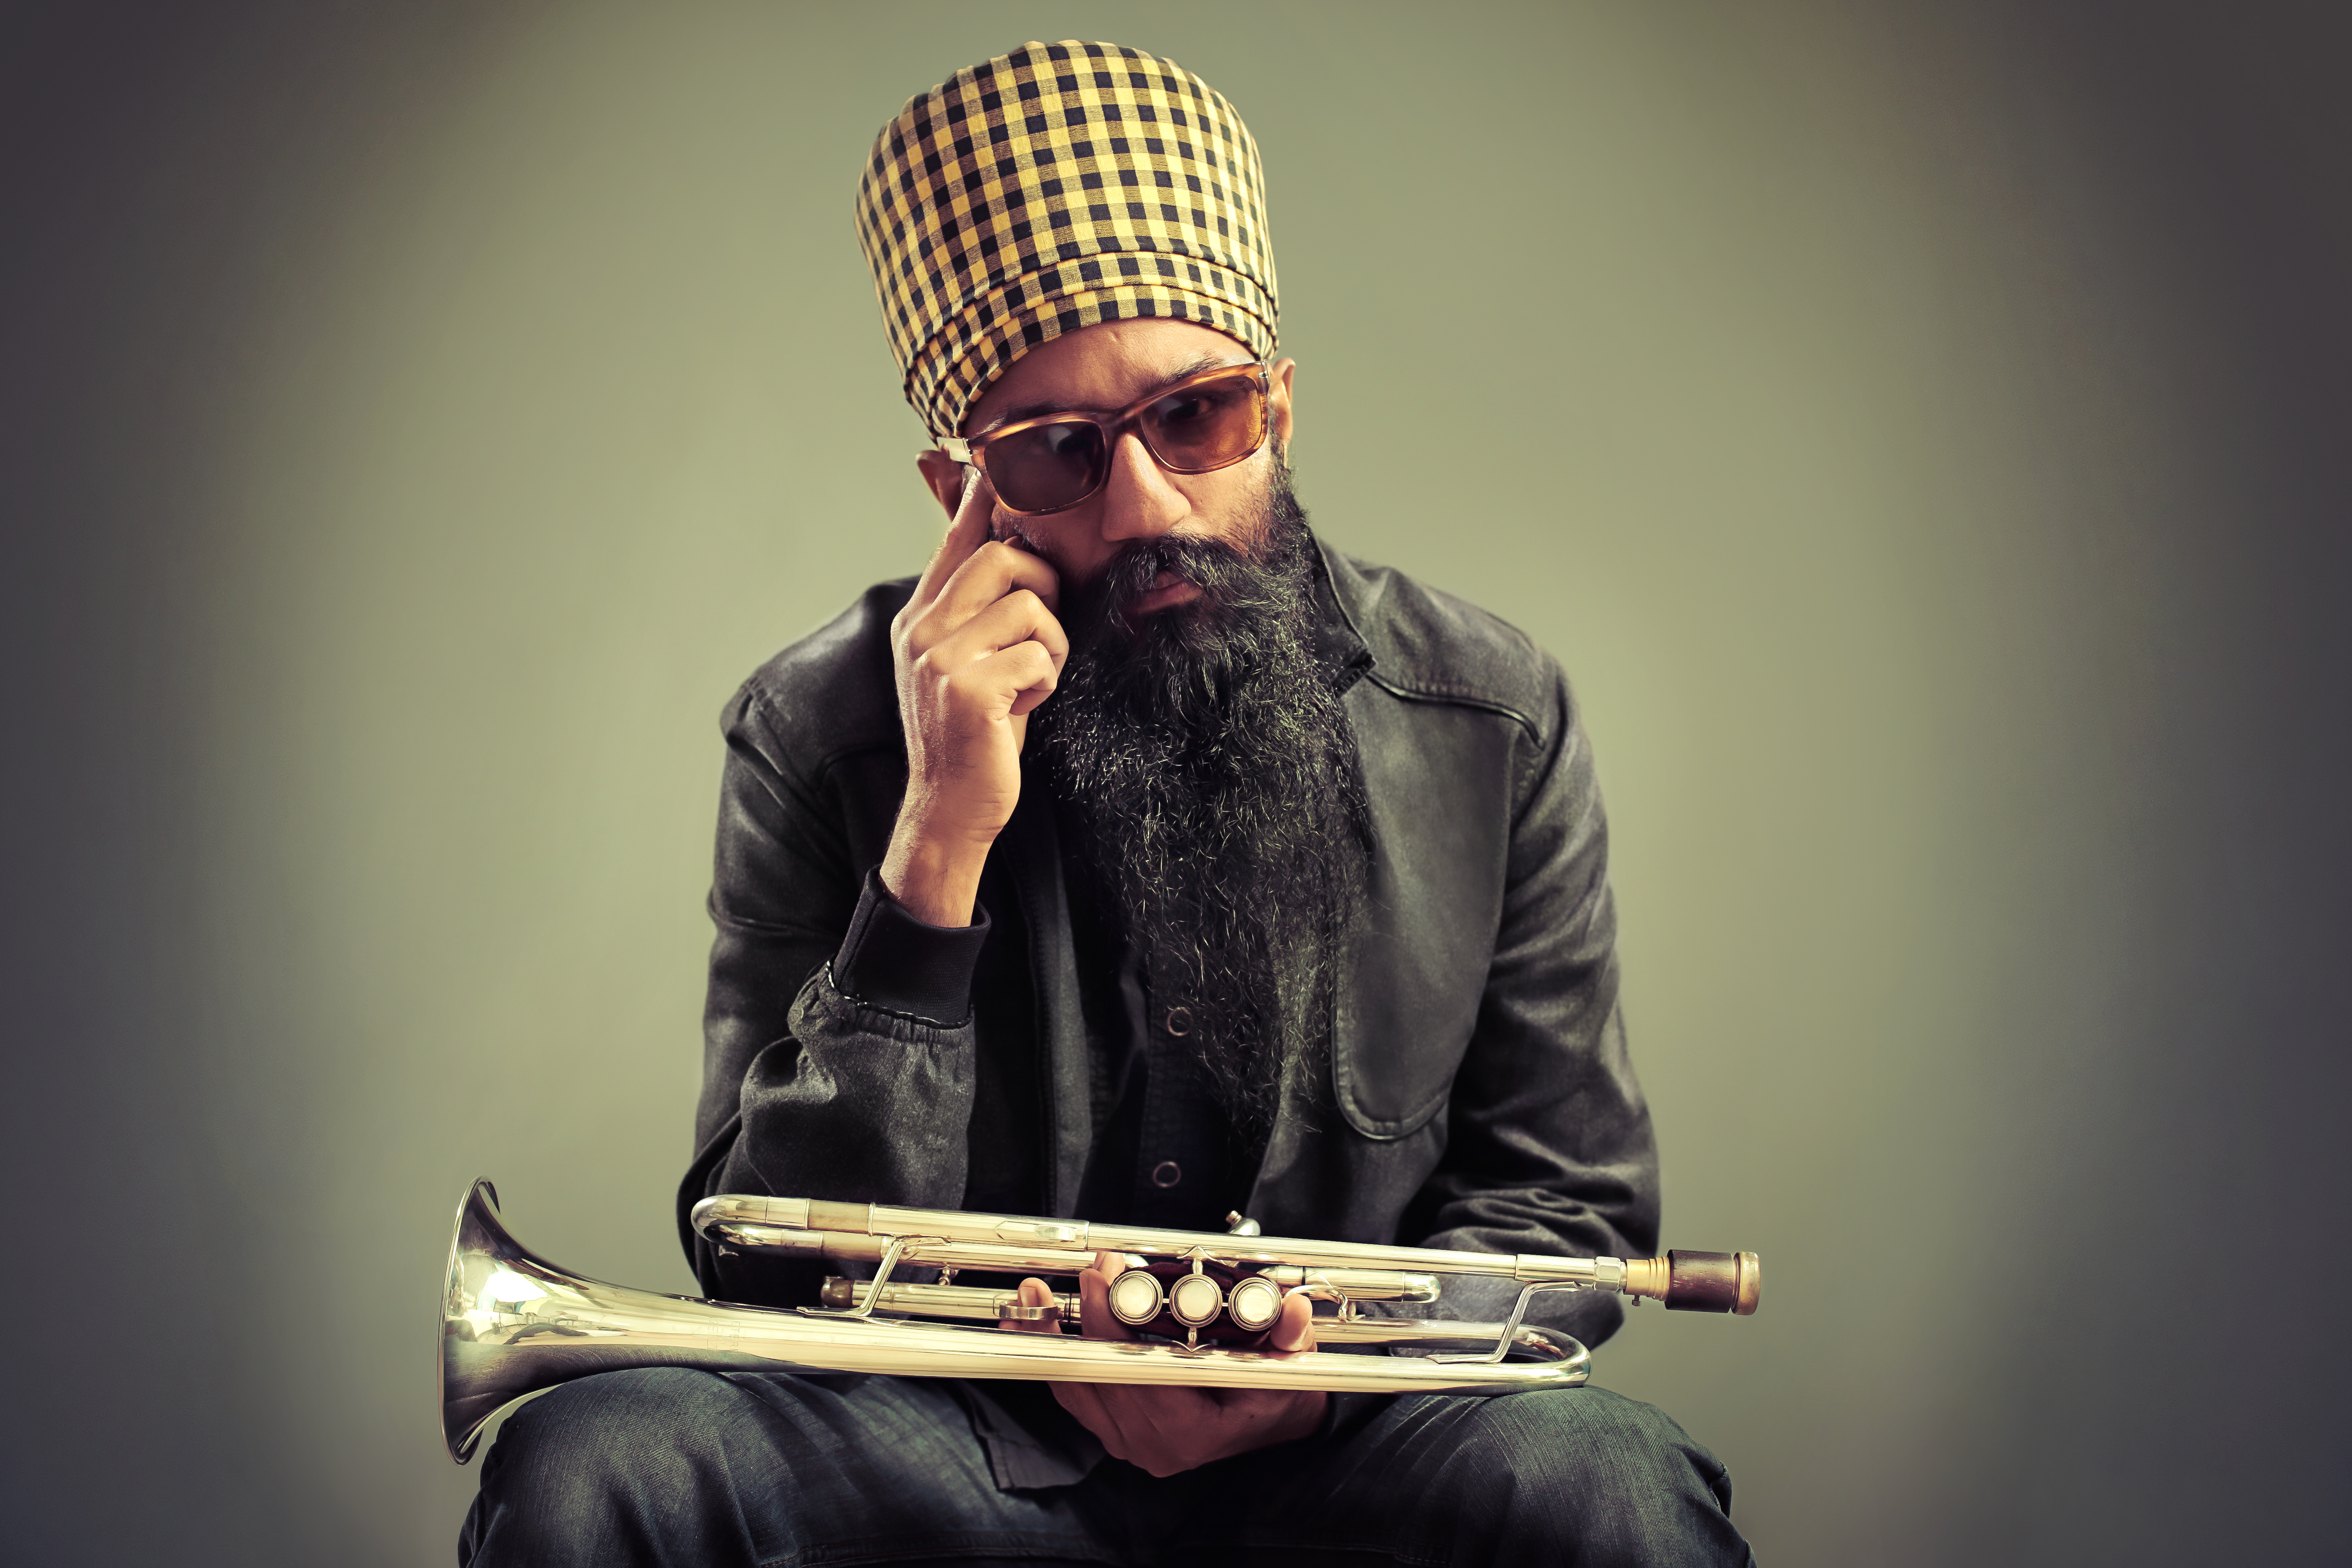 A man poses while wearing a checkered turban and holding a trumpet.  